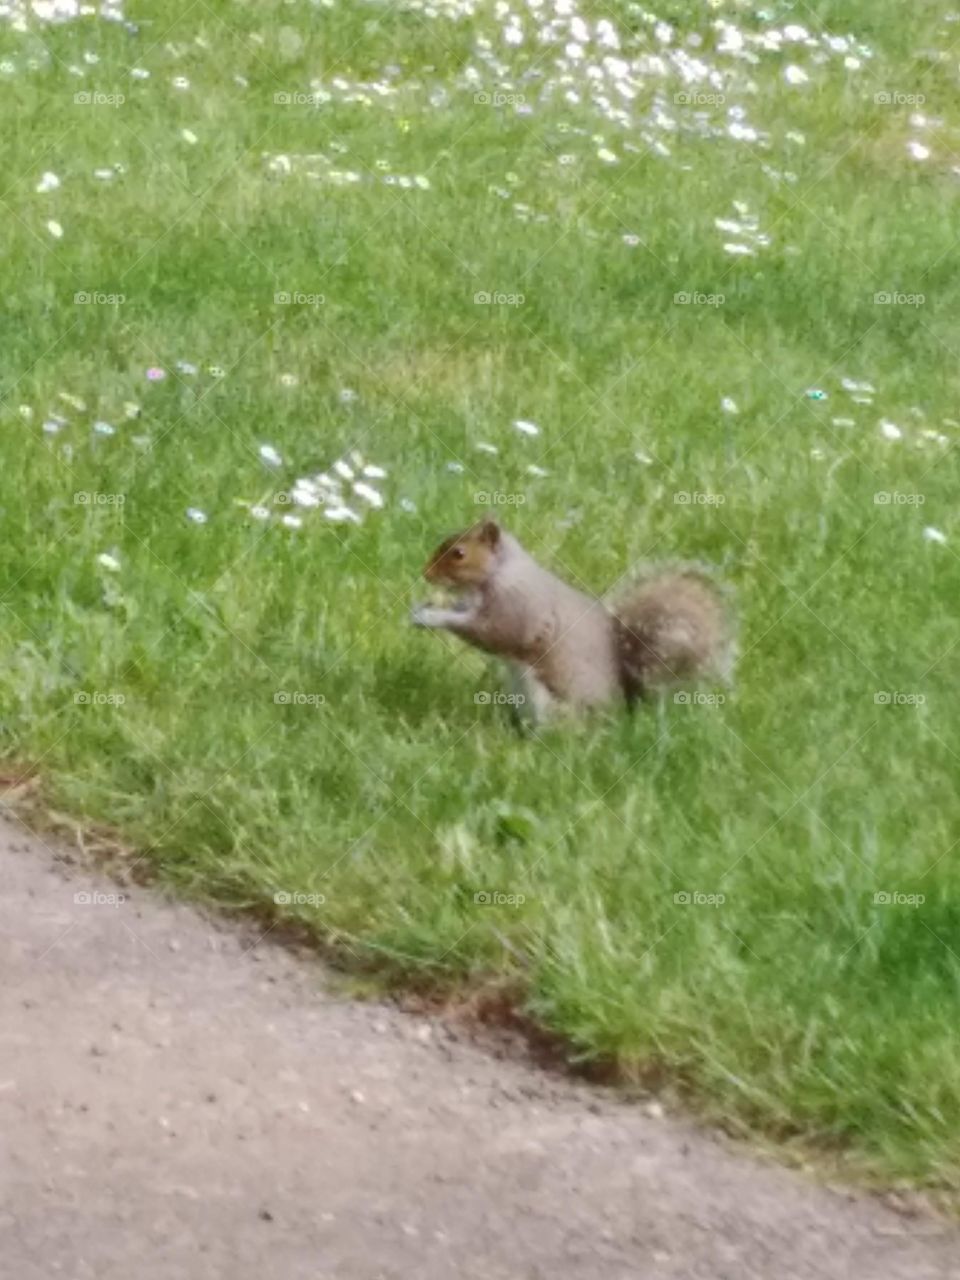 This property is protected by a highly trained squirrel